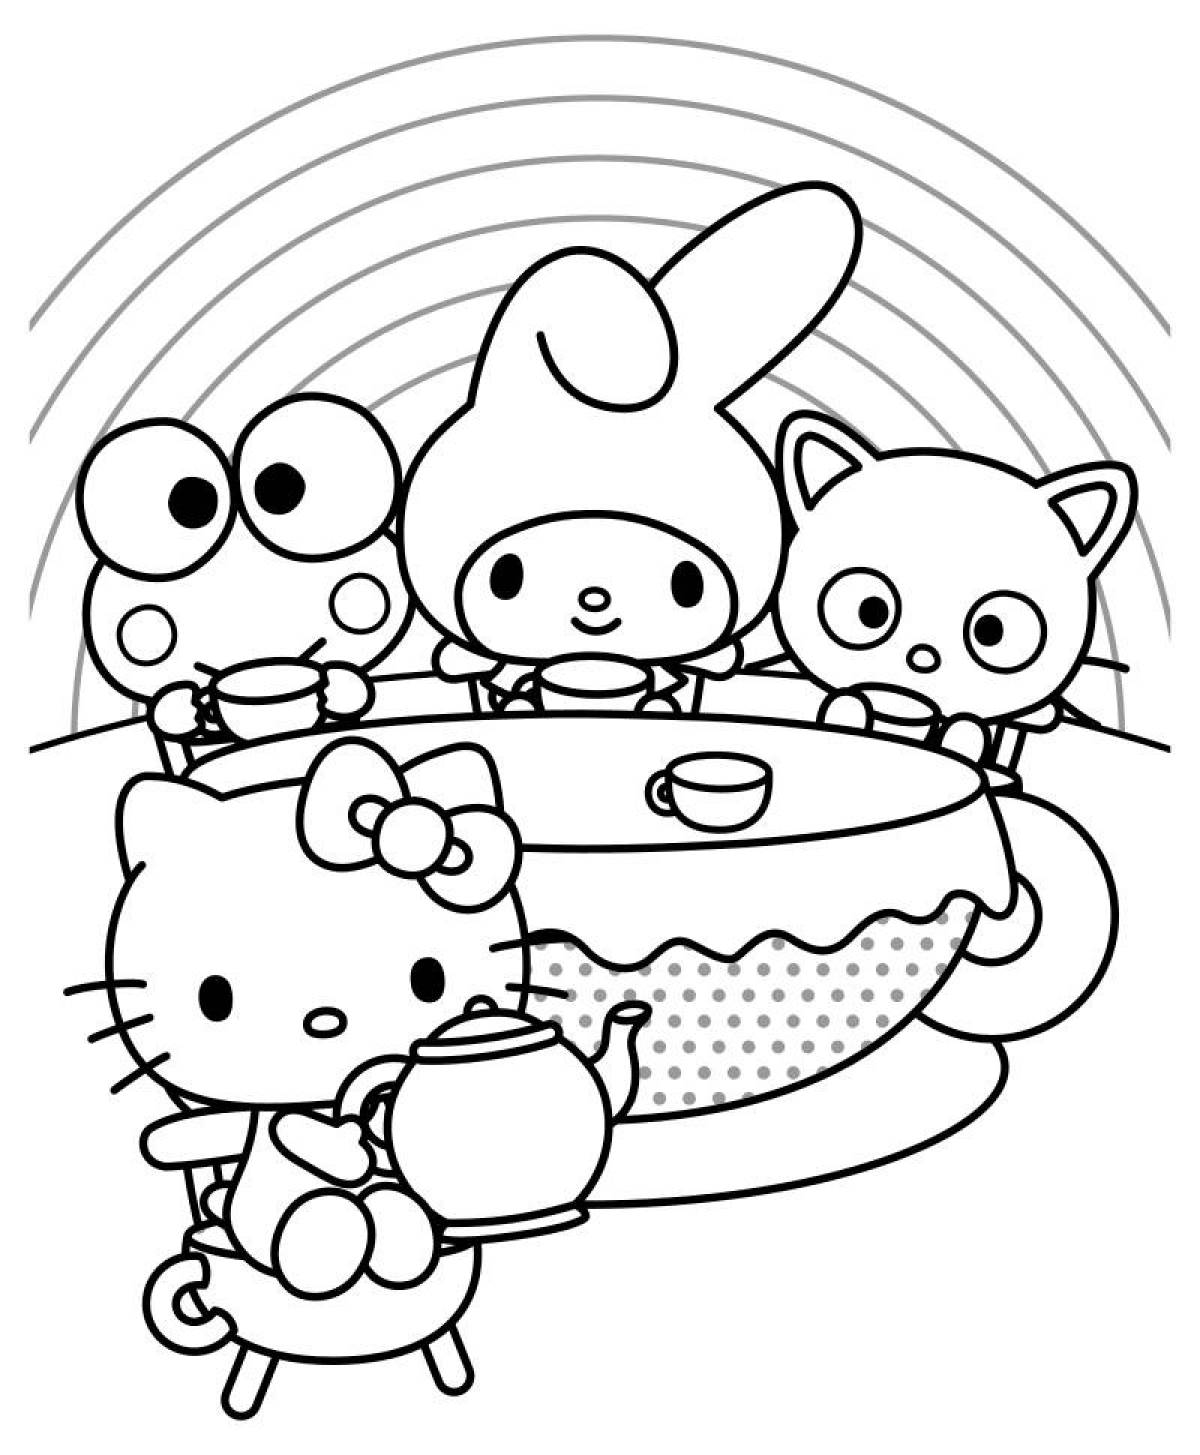 Fun coloring page of hello kitty melodies